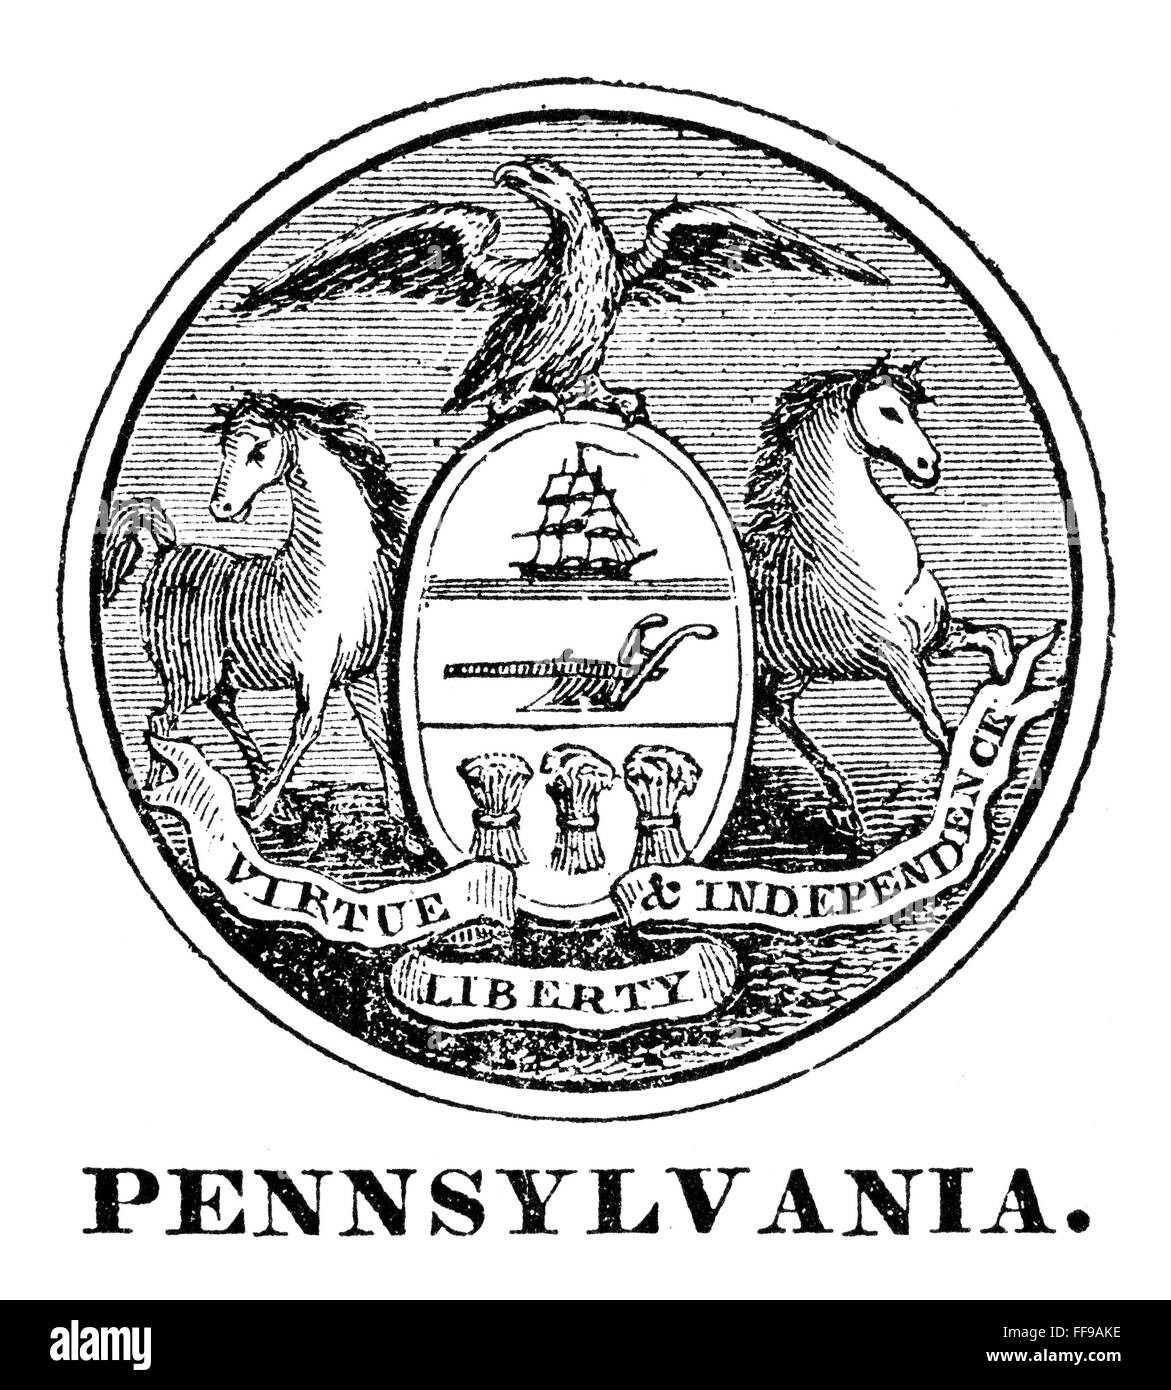 PENNYSLVANIA STATE SEAL. /nThe seal of Pennsylvania, one of the original Thirteen States, at the time of the American Revolution. Stock Photo